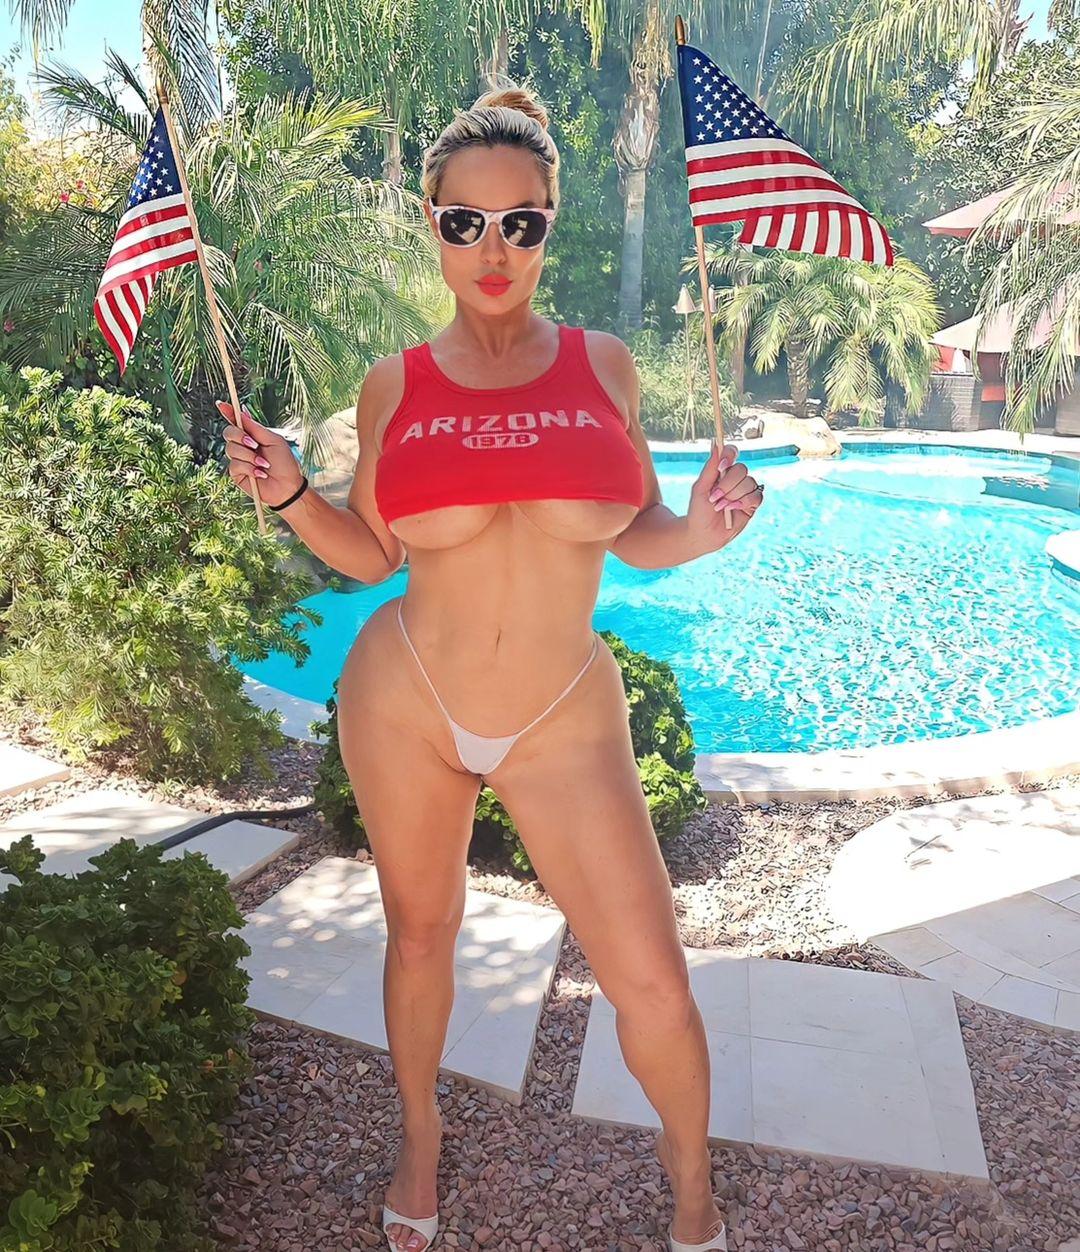 Ice-T Defends Wife Coco Austin's Very Racy 4th Of July Outfit From 'Weirdo' Fans